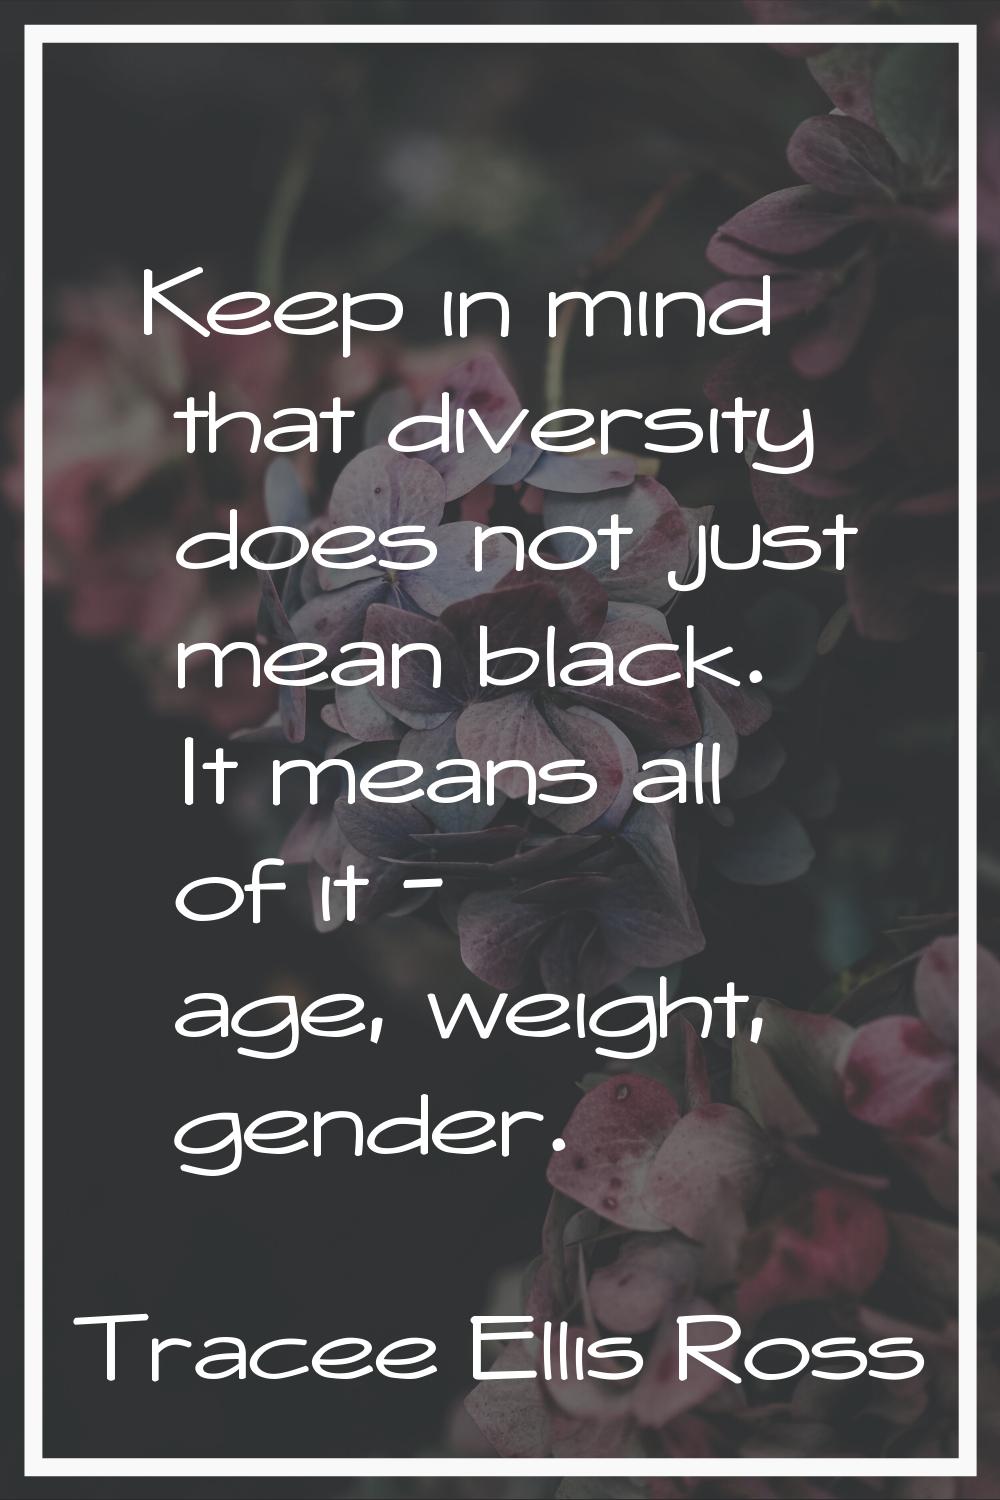 Keep in mind that diversity does not just mean black. It means all of it - age, weight, gender.